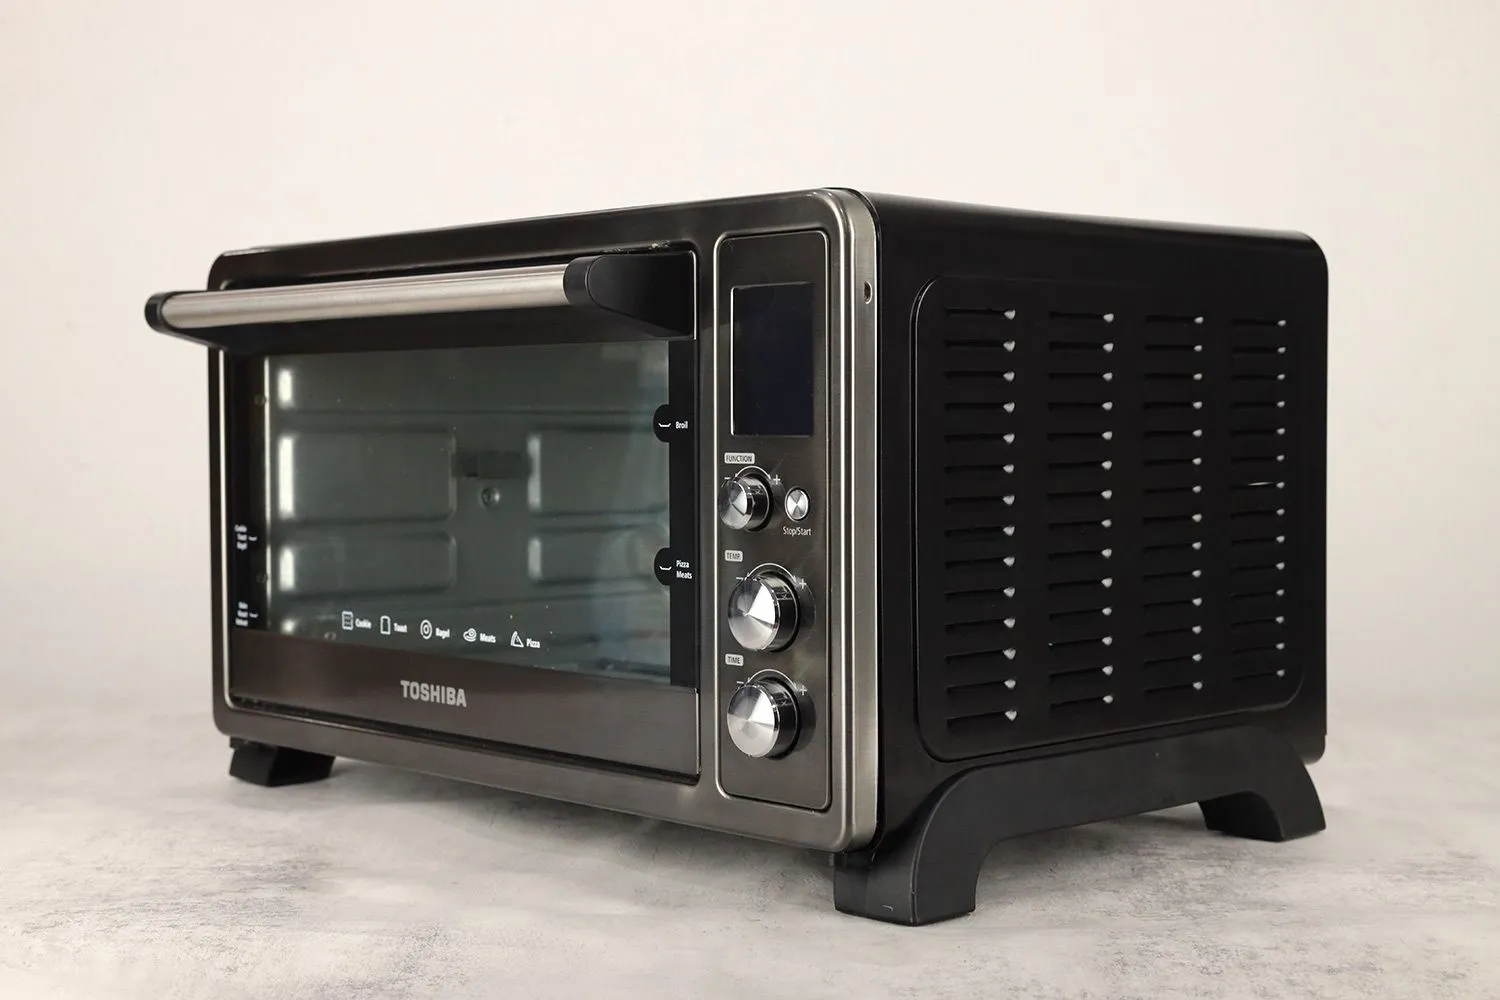 Toshiba AC25CEW-BS Digital Convection Toaster Oven In-depth Review -  Healthy Kitchen 101